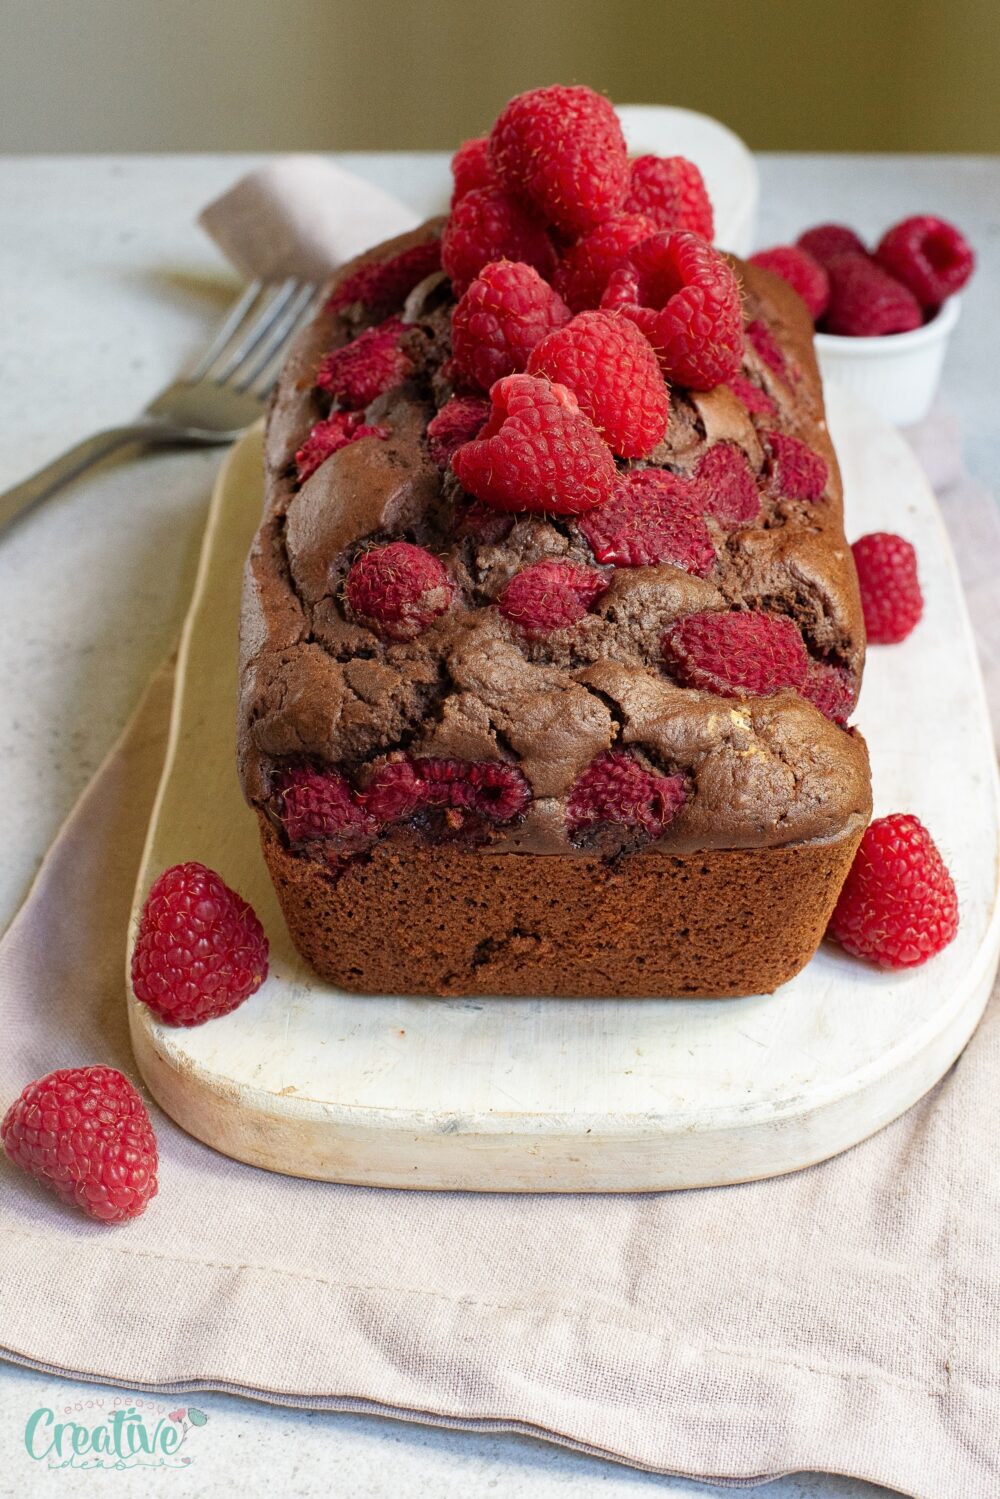 Indulge in the perfect chocolate raspberry pound cake recipe! Create a moist, delightful treat with simple steps. Ideal for any occasion.